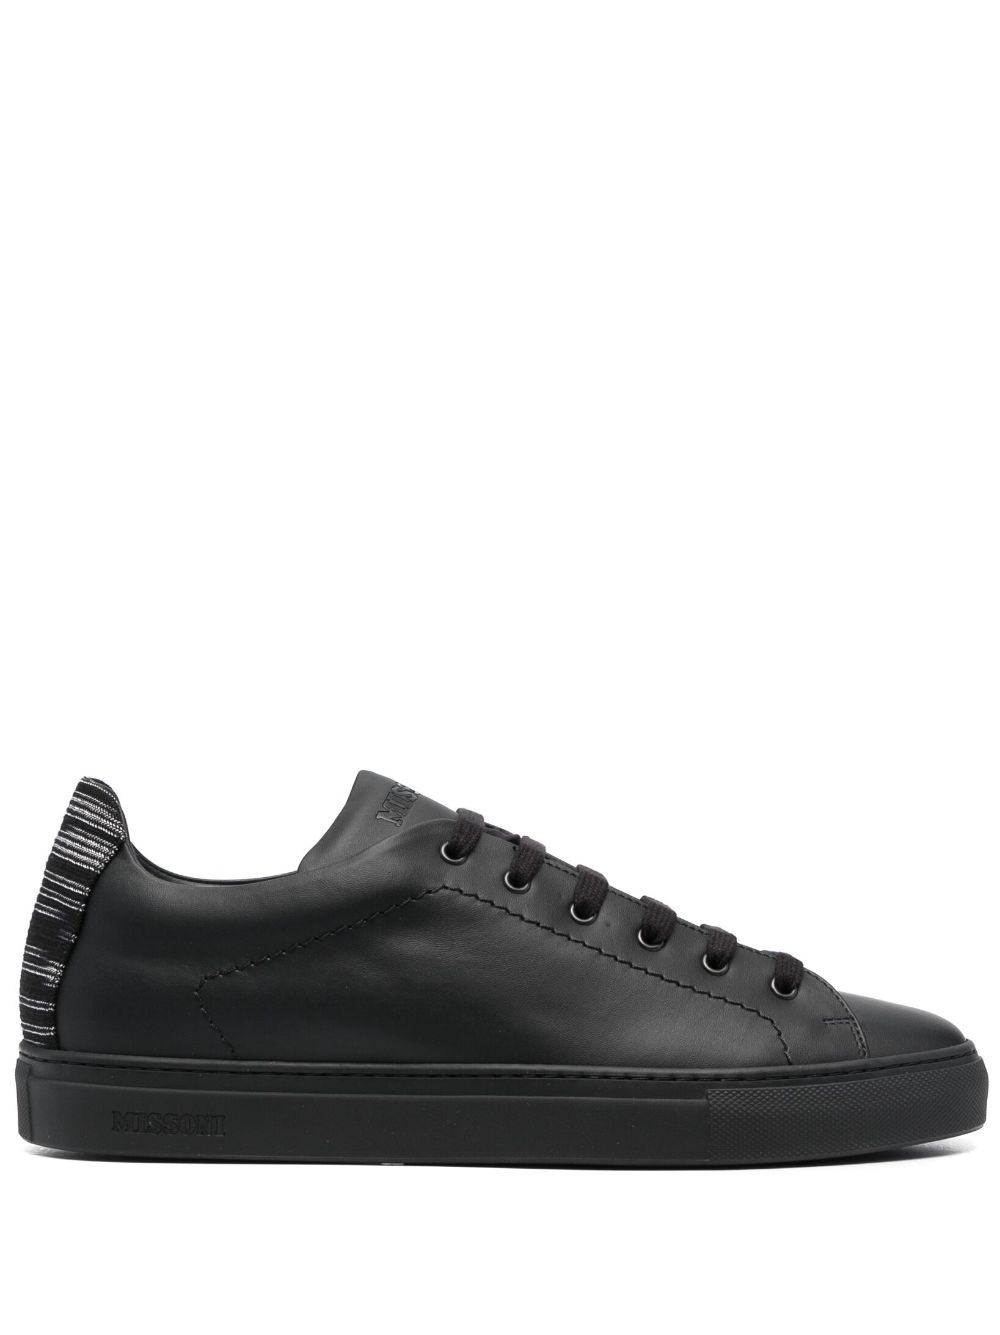 woven-heel counter leather sneakers - 1